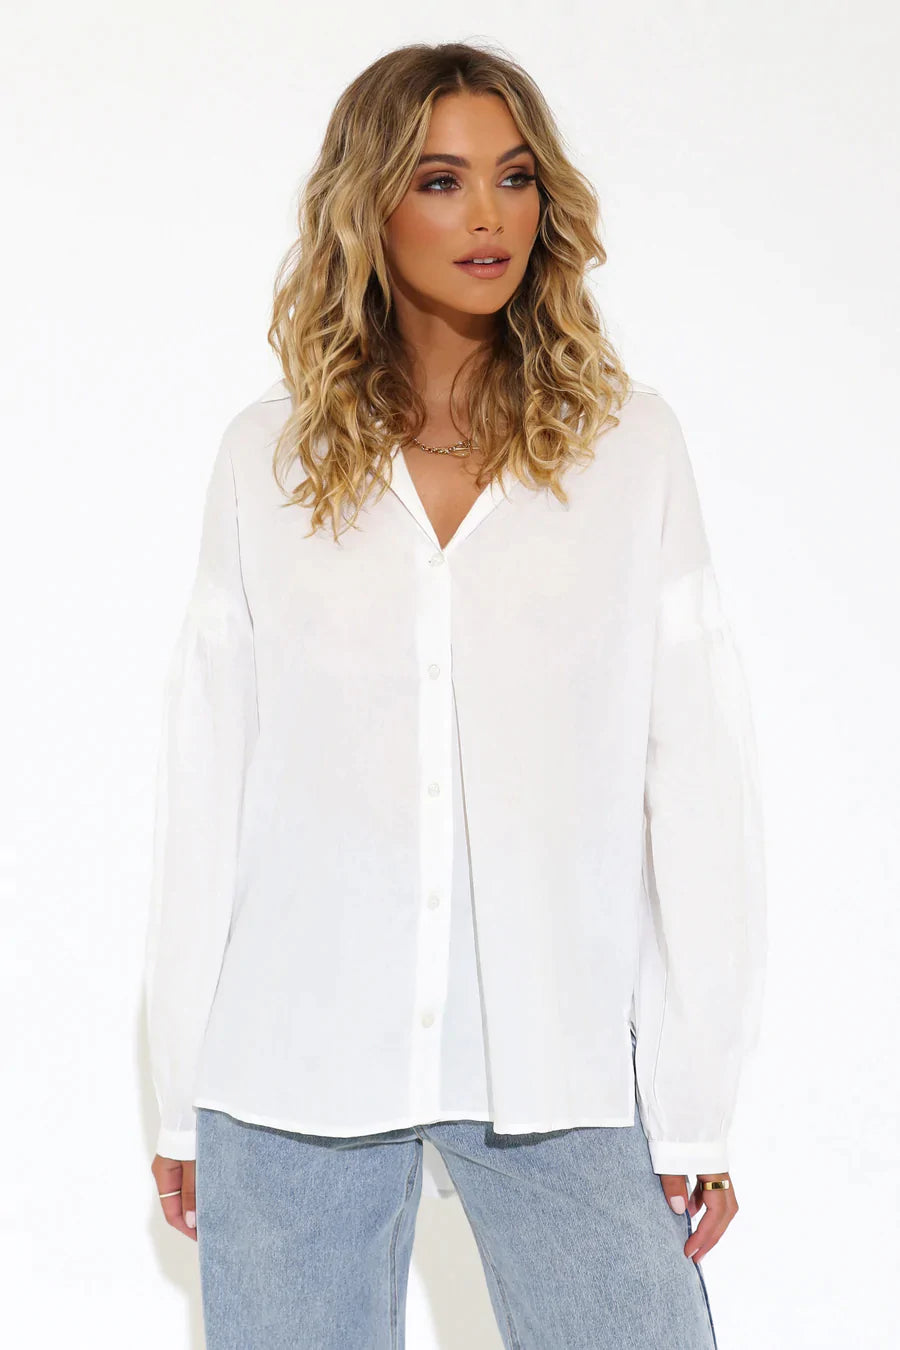 Pre-loved, Madison the Label Felicity Top, White